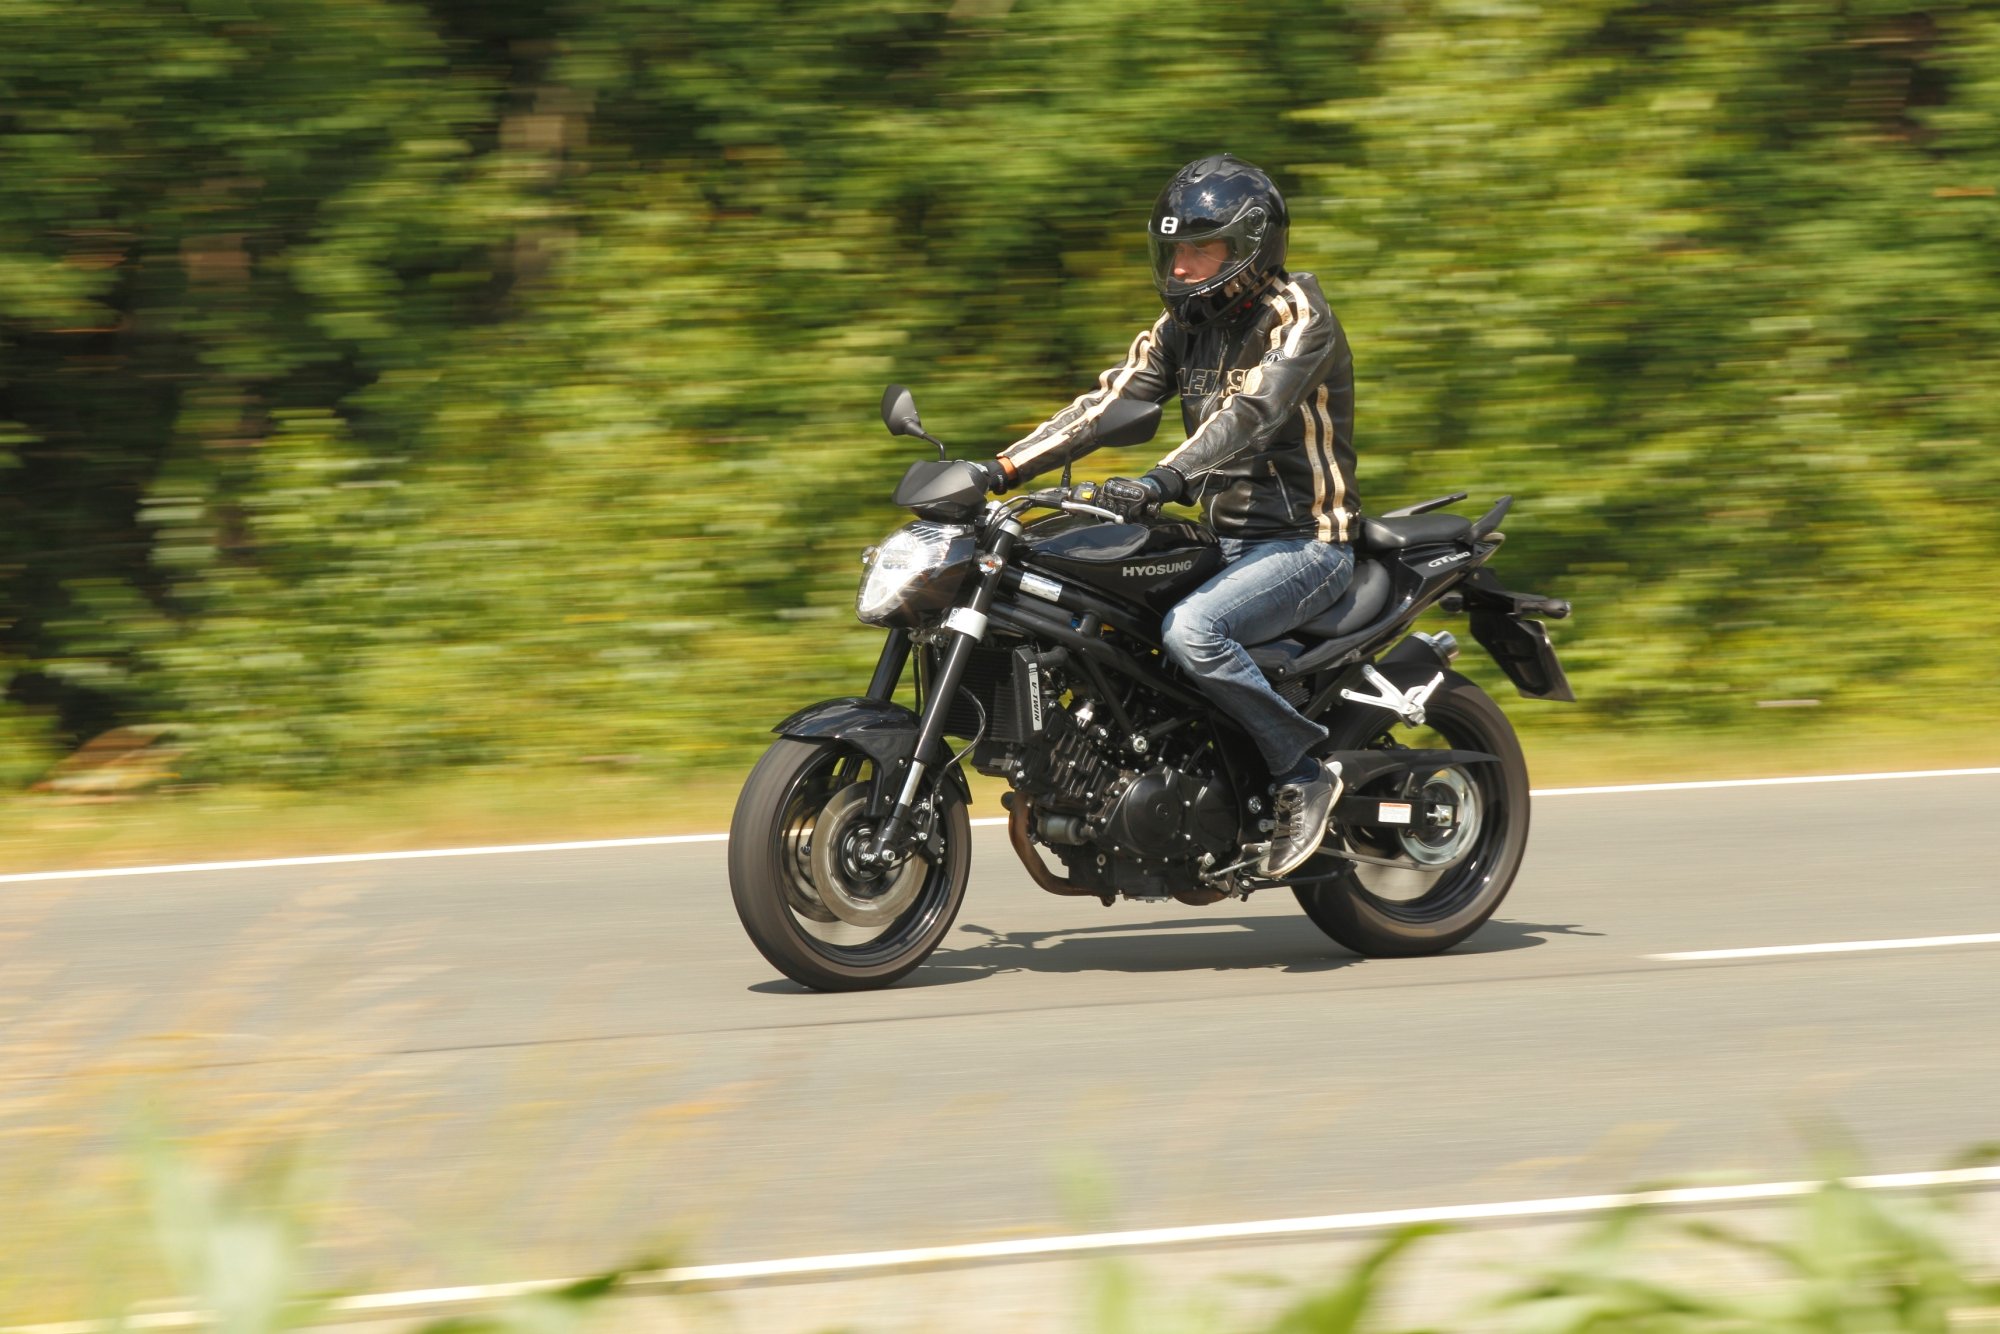 2016 Hyosung GT650 Review